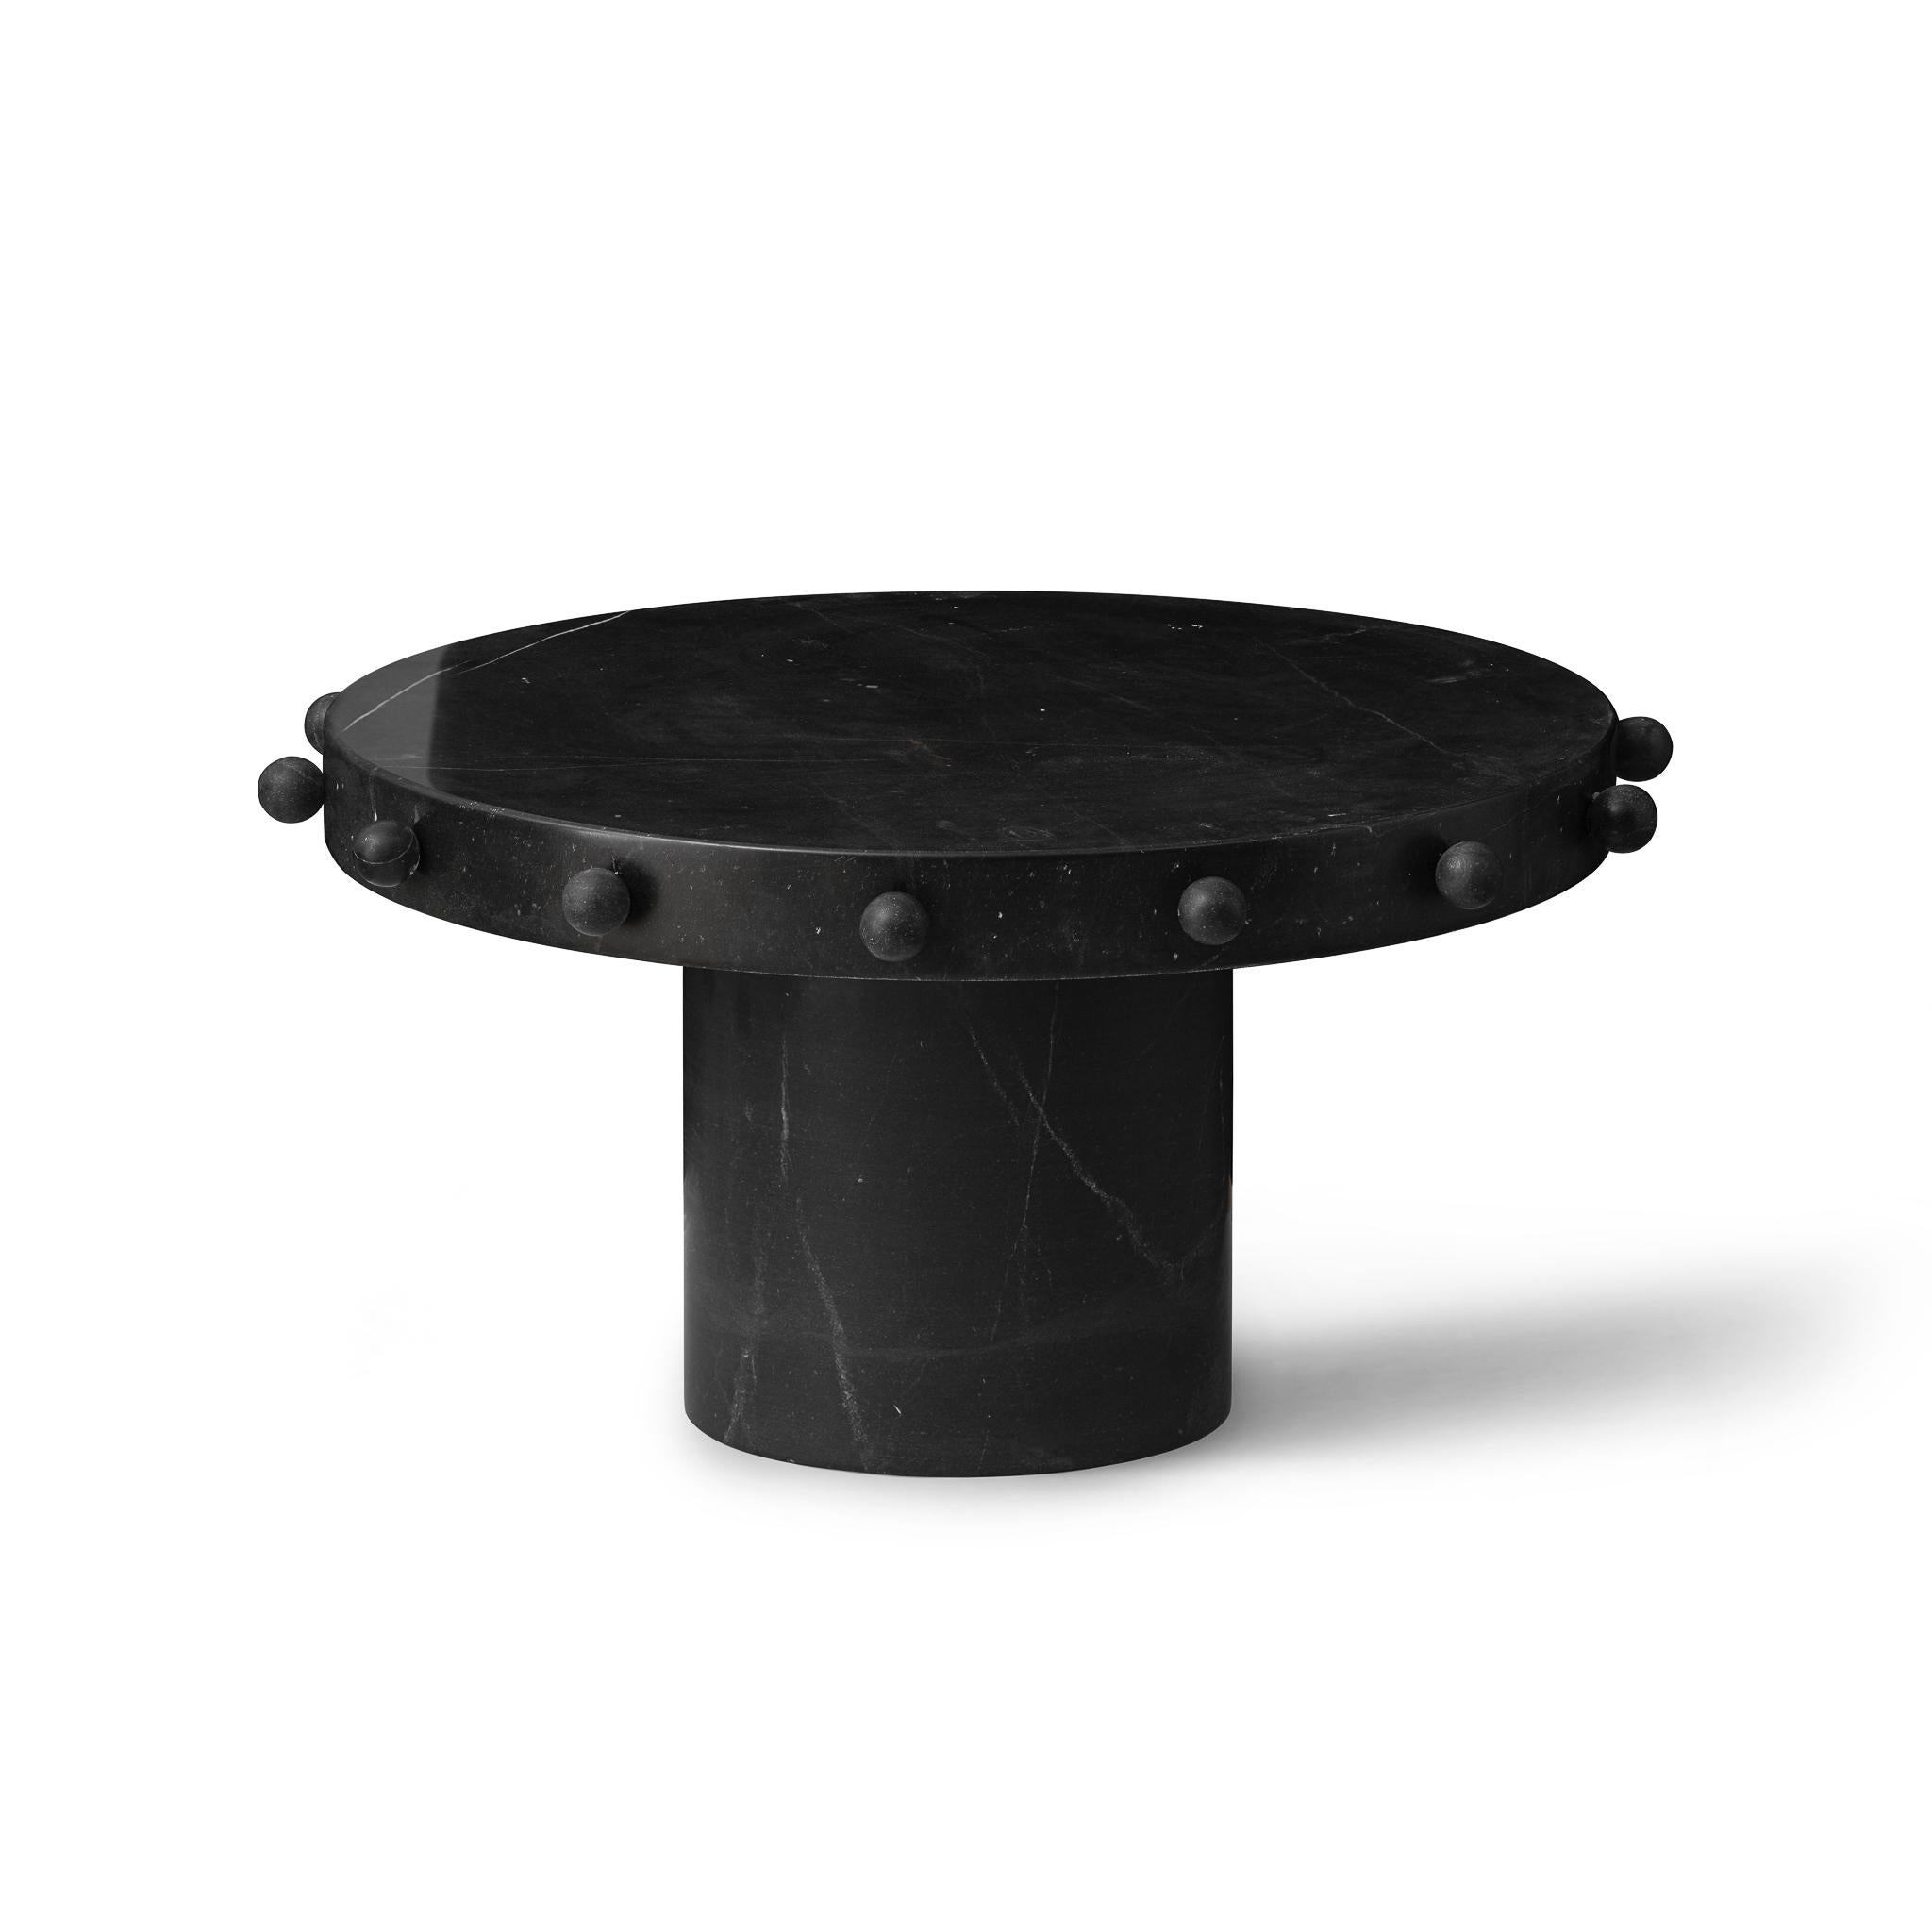 The Knob Trio Tables are an exercise in aesthetic judo, manipulating the weight of Nero Marquina marble into forms that exude an almost casual lightness. Their honed surfaces, redolent of the ancient Mediterranean, speak to the grandeur of human